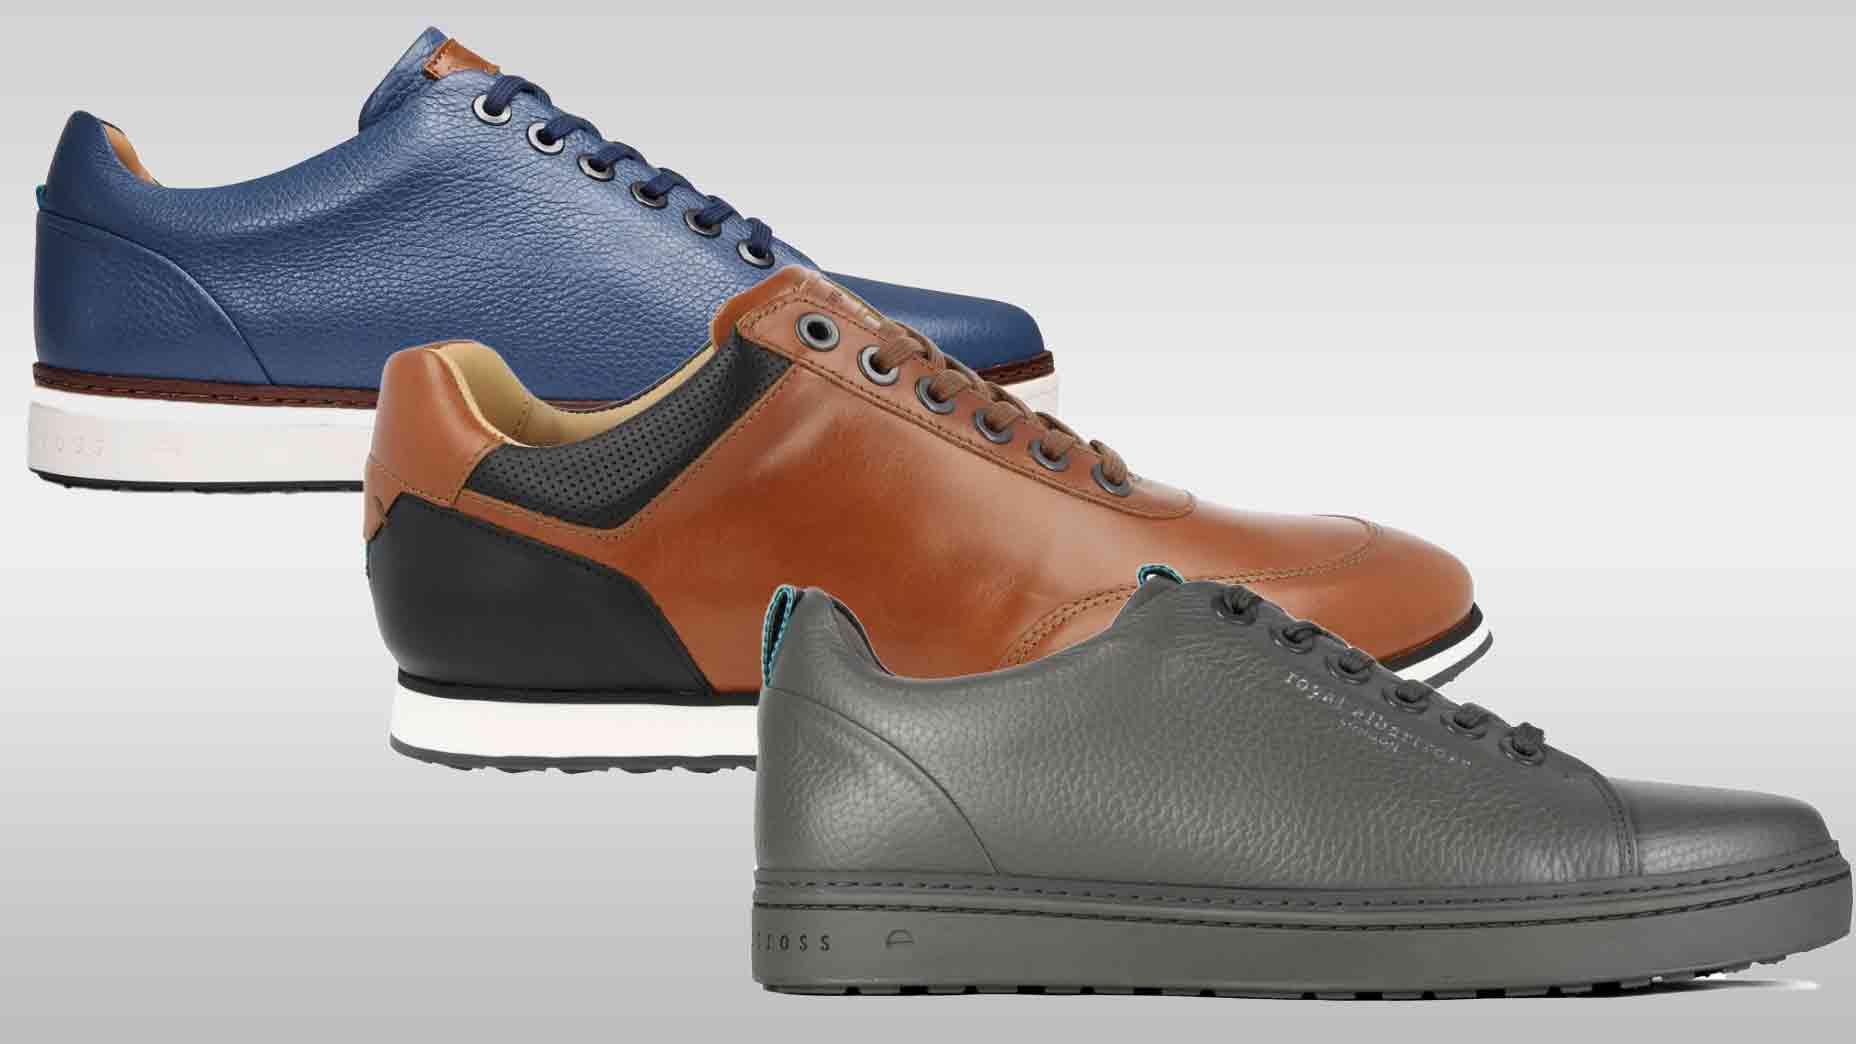 Wear these 8 pairs of sophisticated shoes on and off the course